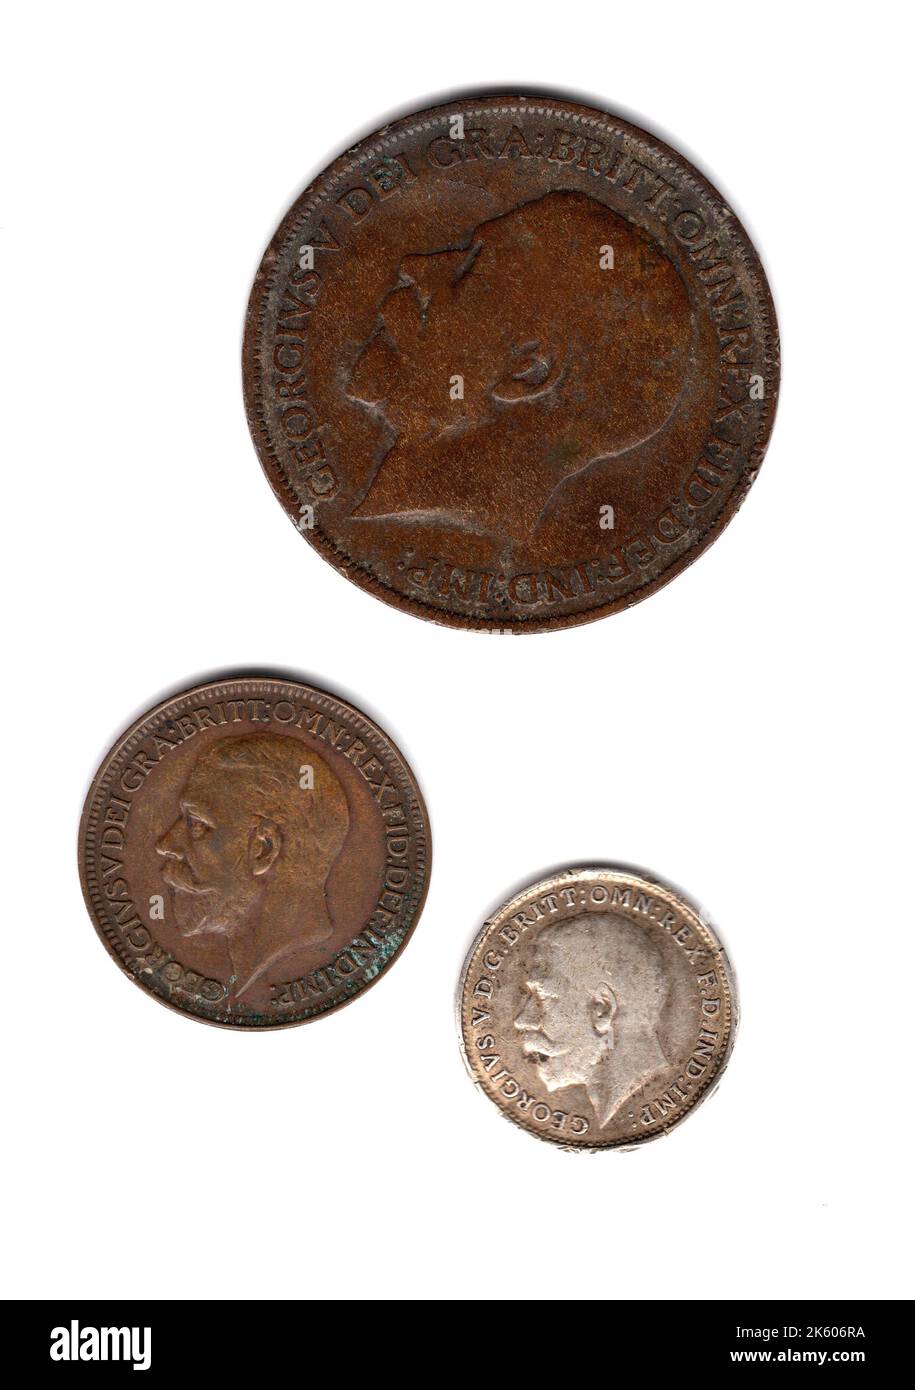 A mixture of vintage Great Britain coins featuring King George V. Stock Photo